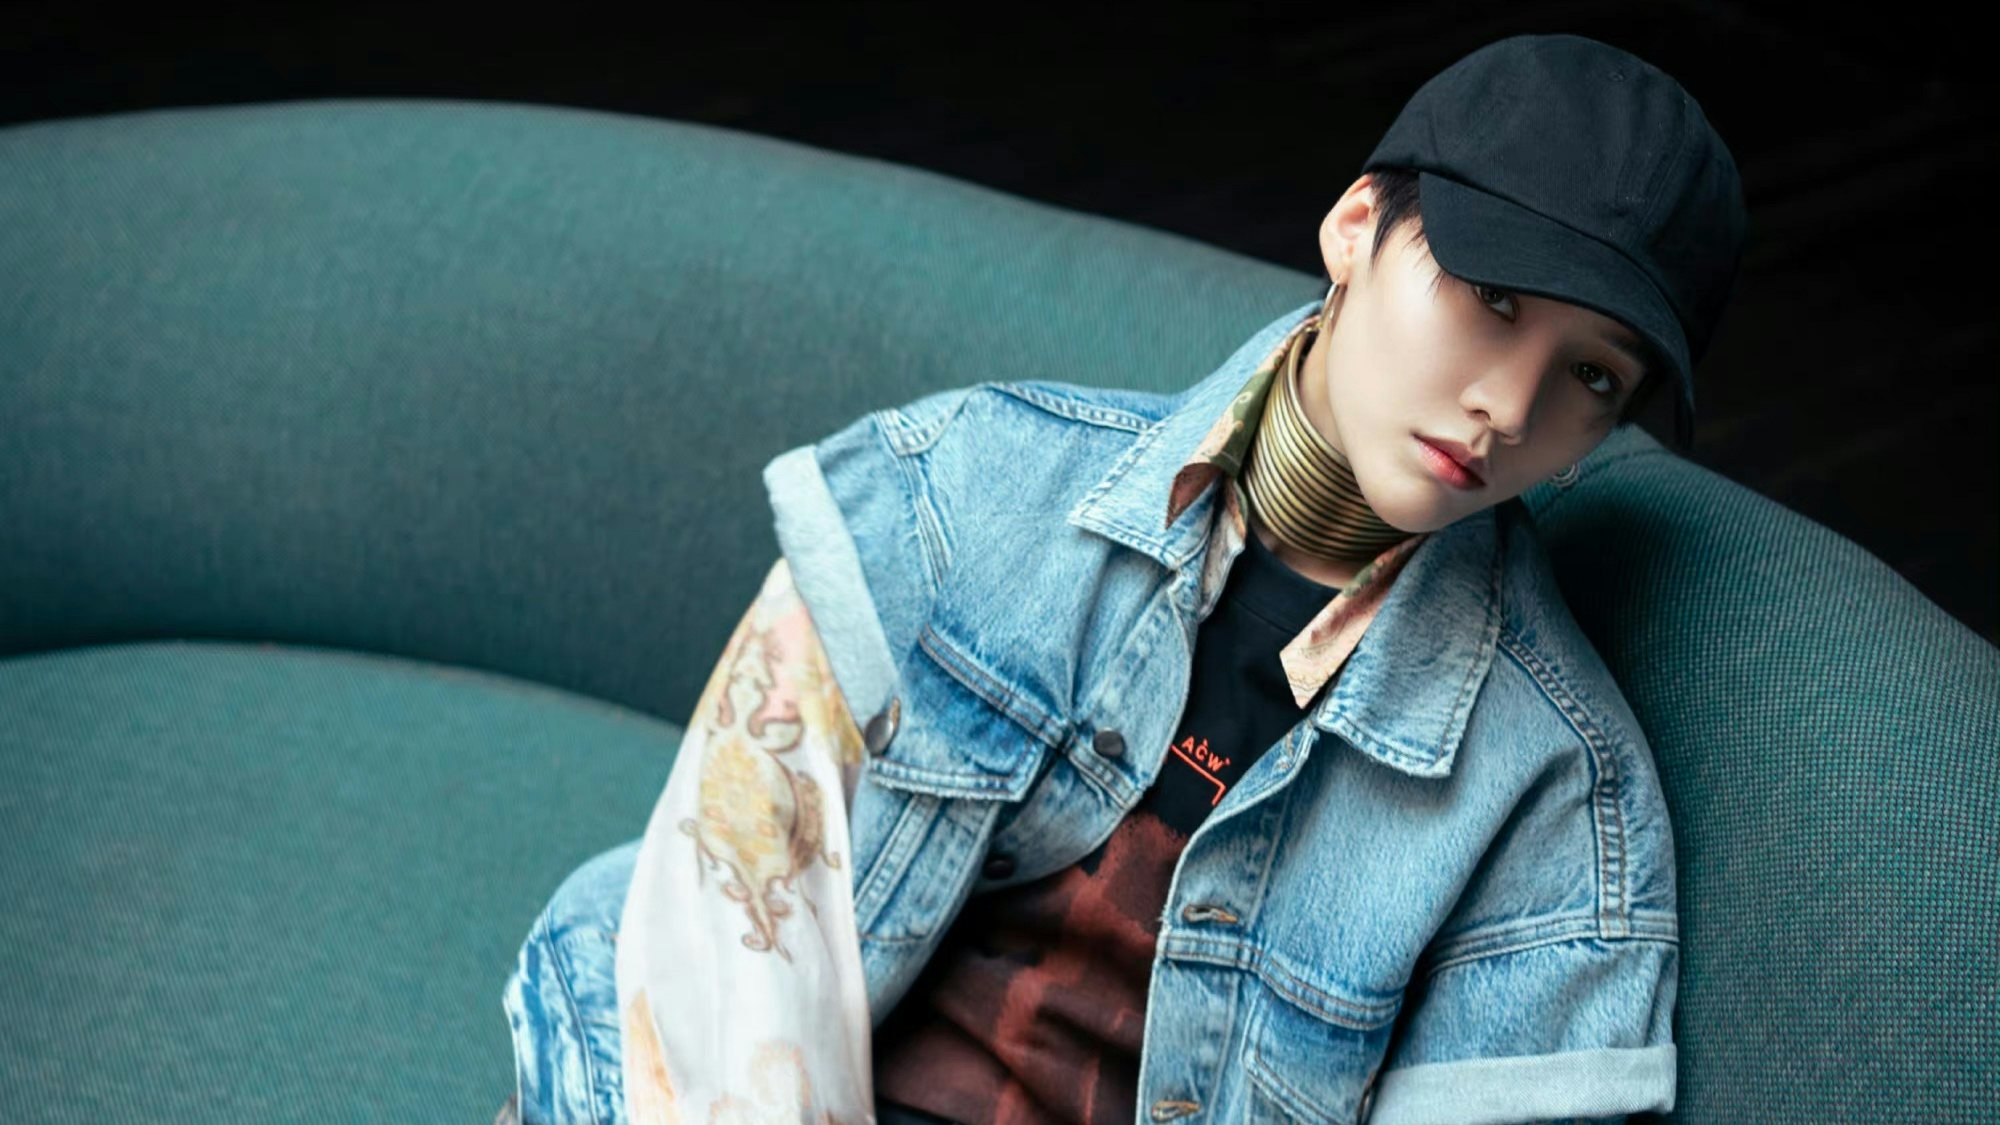 A-COLD-WALL* is opening its first store in China in Beijing's Taikoo Li mall. Will the move help the streetwear brand capture the domestic market? Photo: A-Cold-Wall*